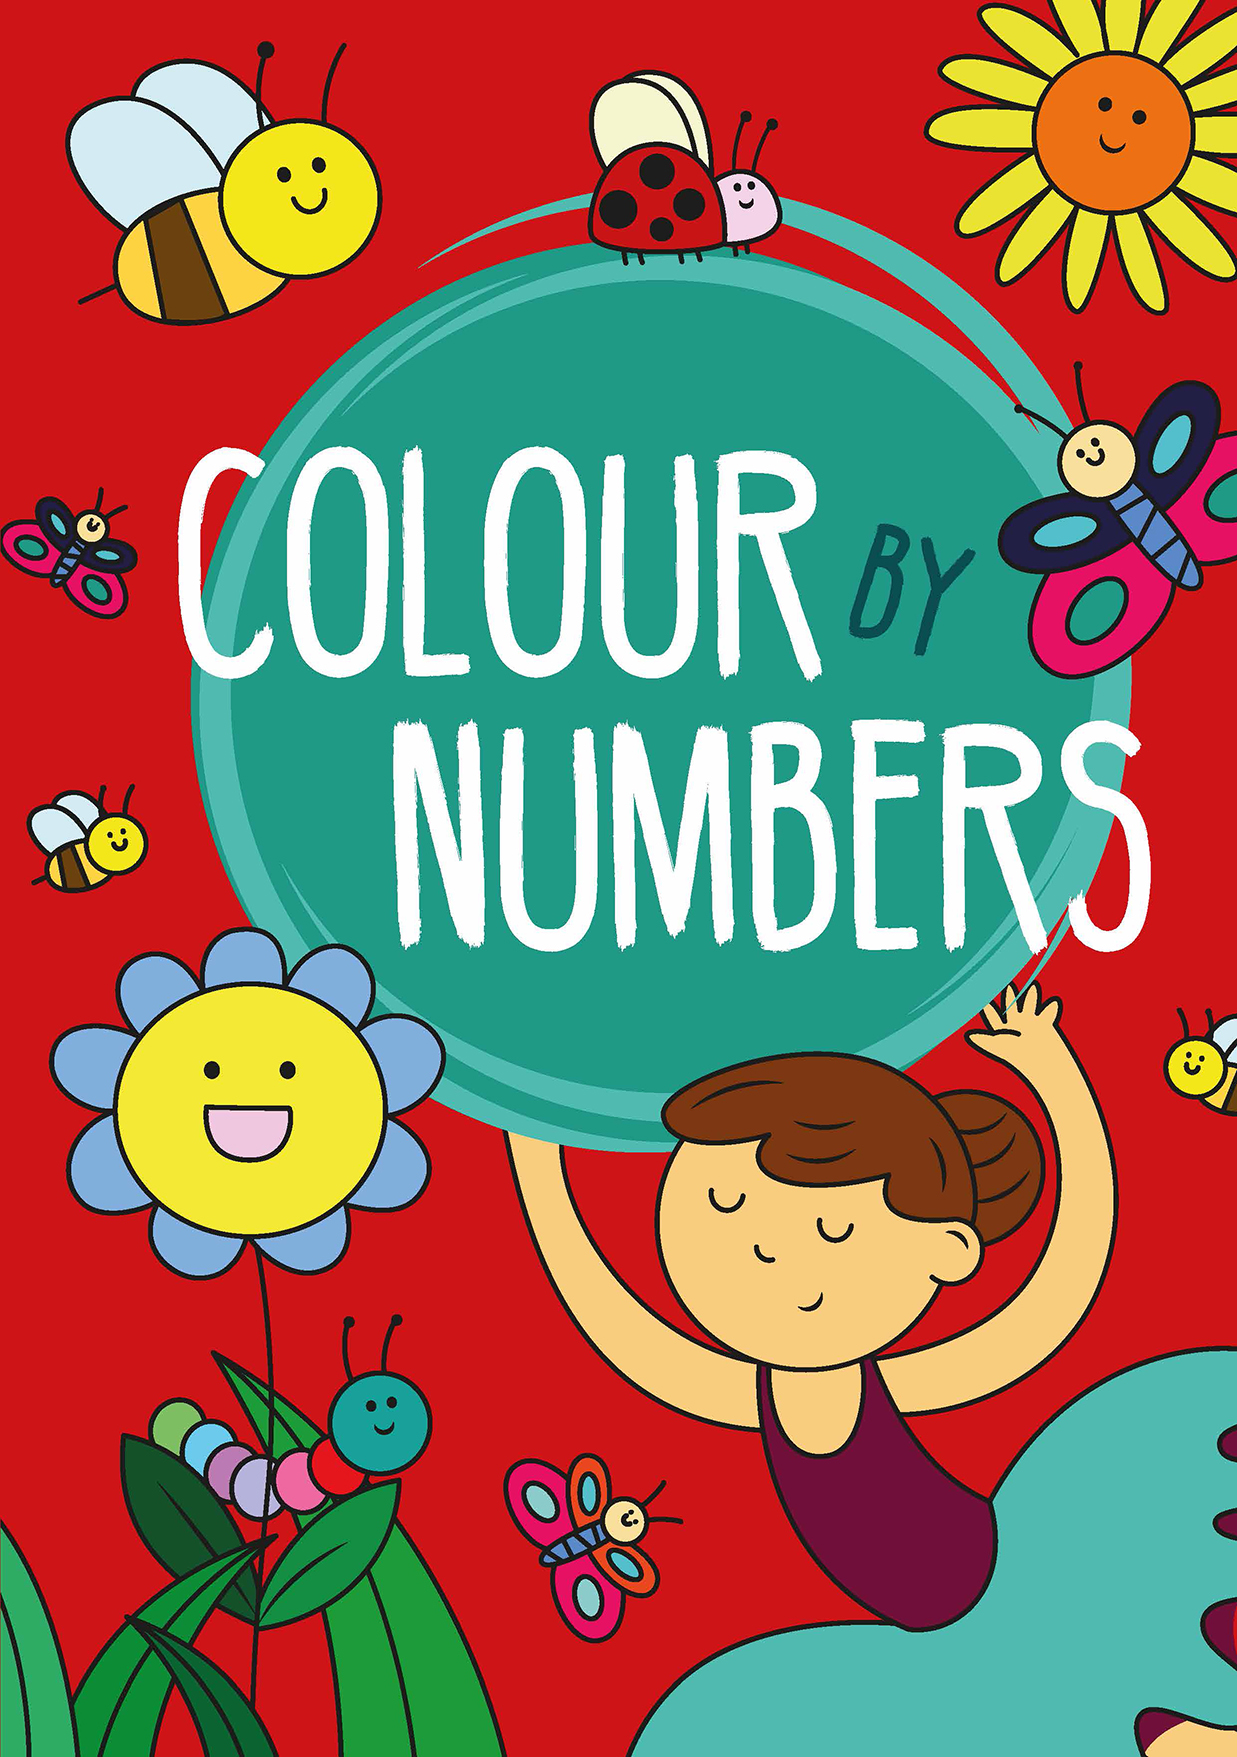 Colour by numbers - Cuberdon